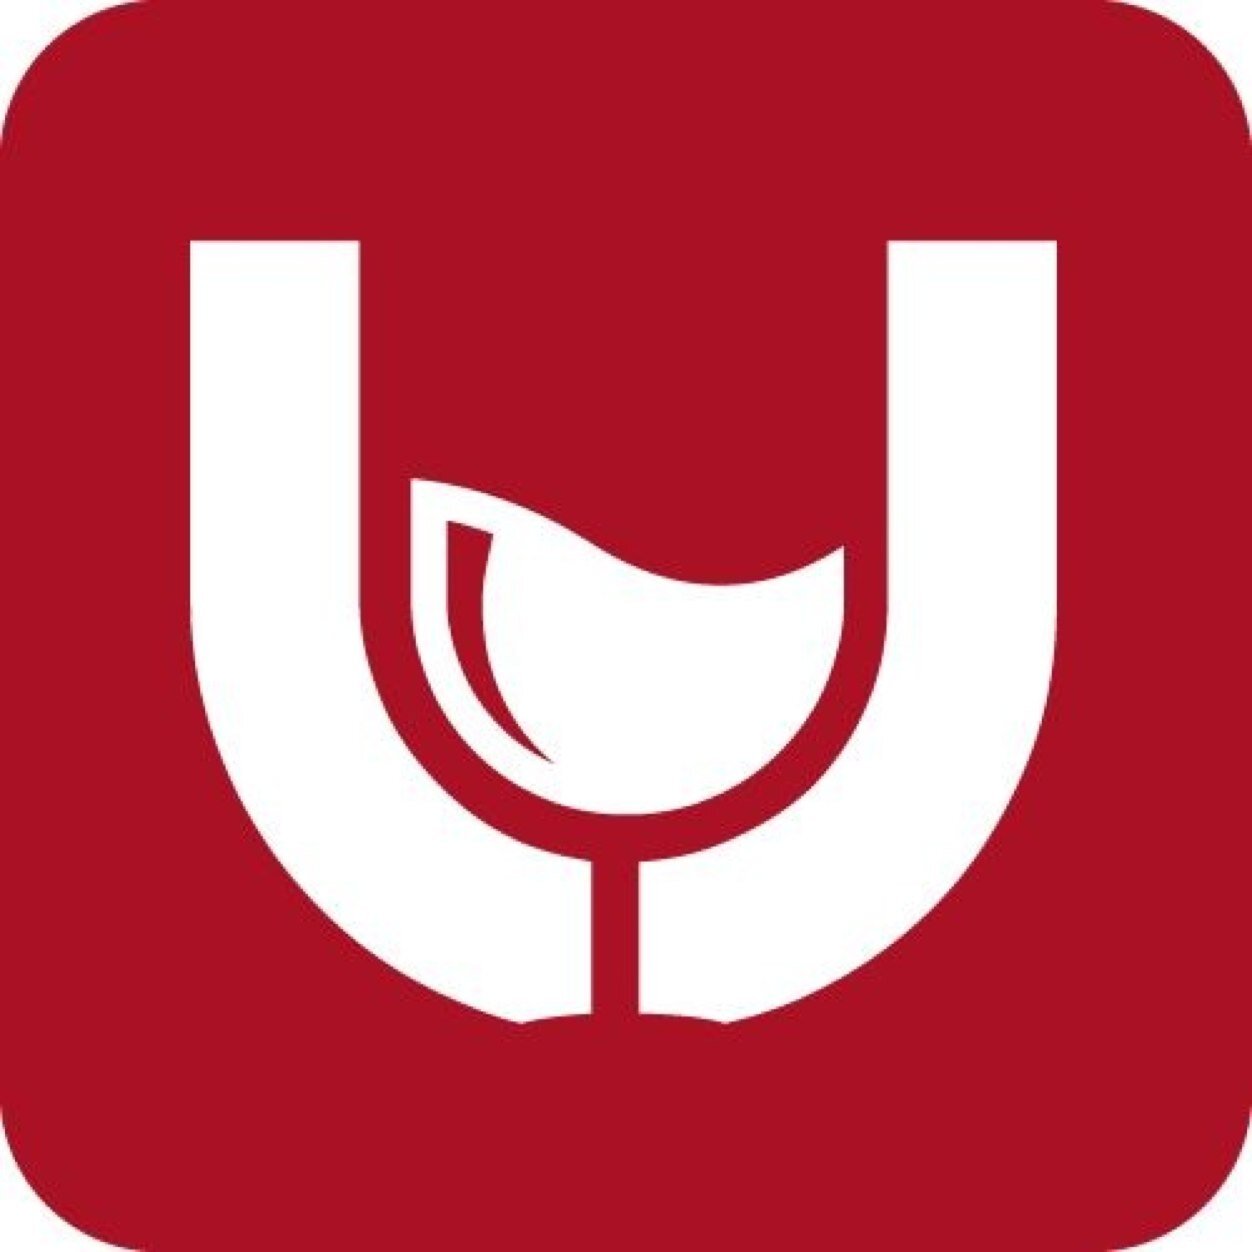 unWine is a social wine platform that lets you share and enjoy wine without the fancy lingo. Check us out in the App Store!